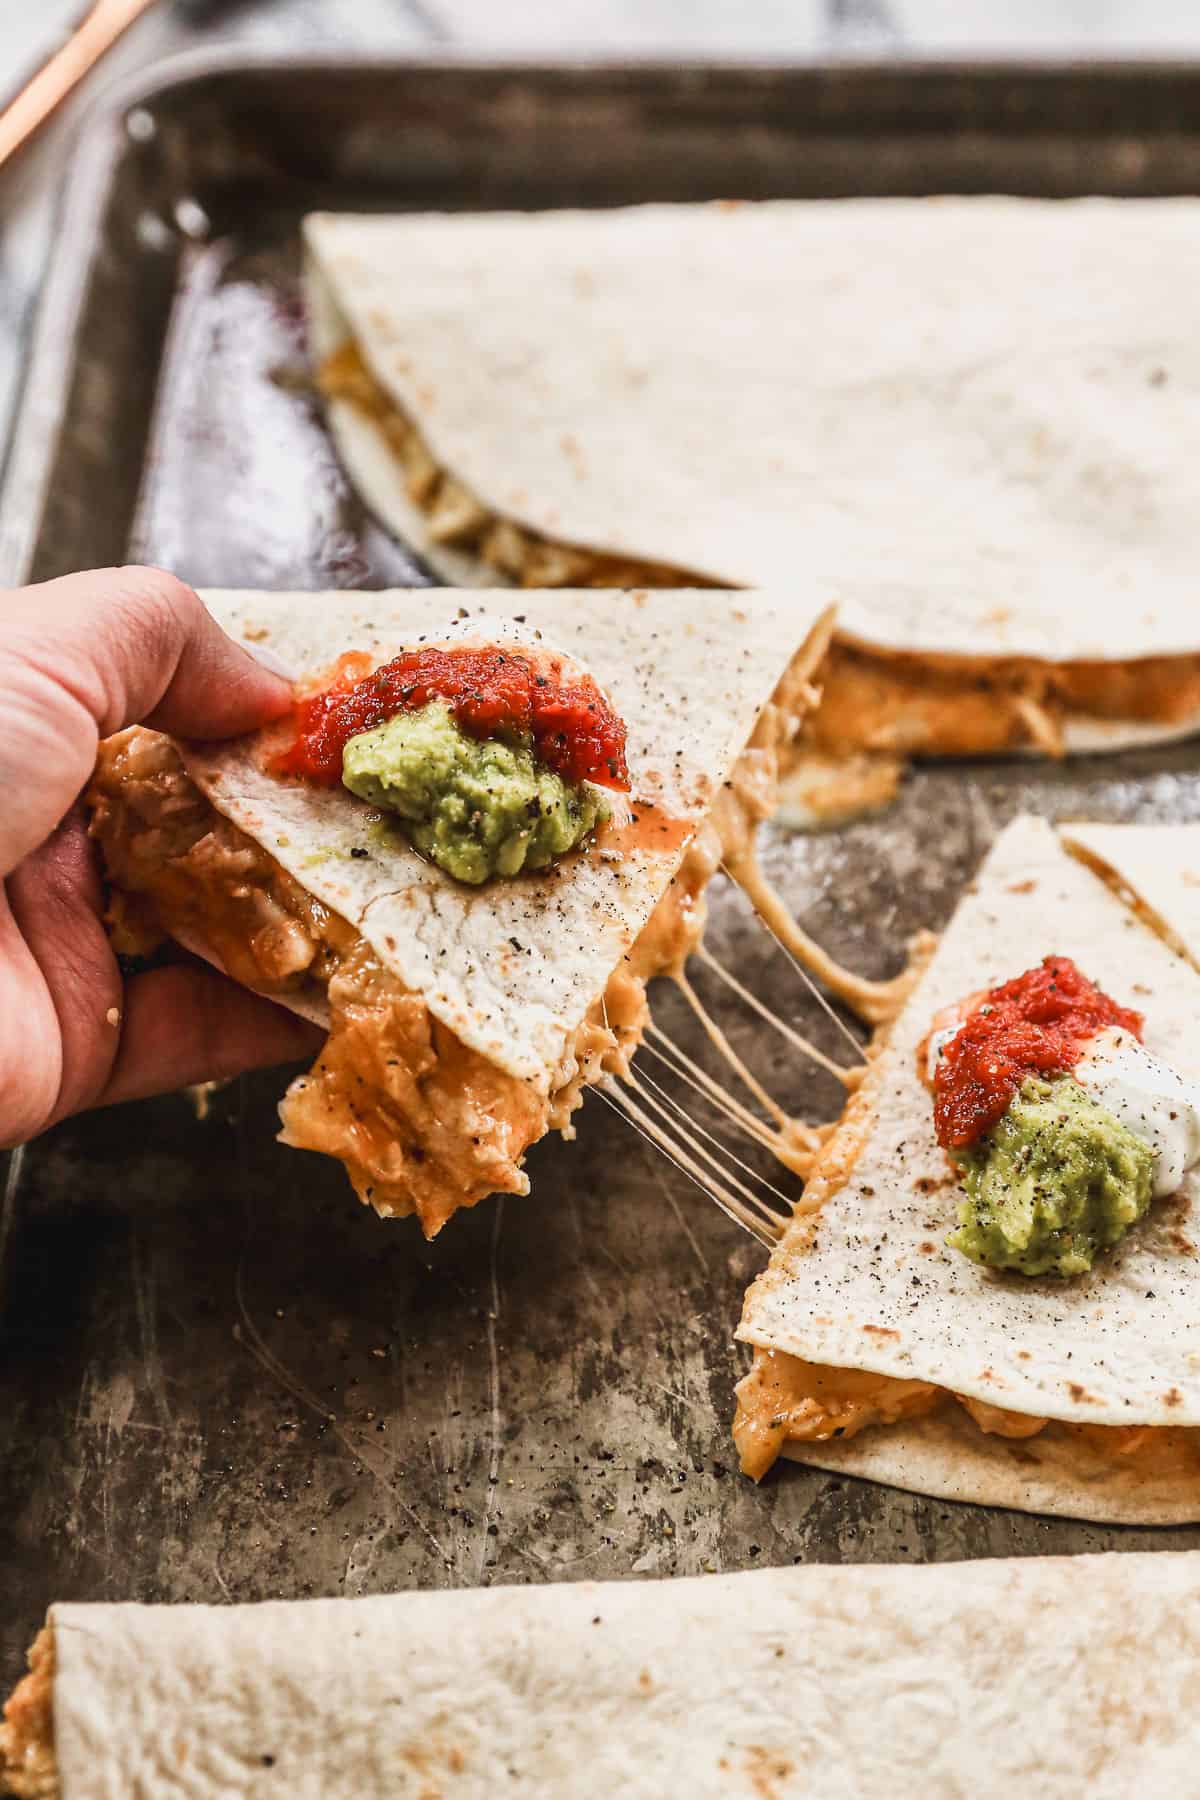 A quesadilla wedge being pulled from the rest to show the cheesy filling, topped with a spoonful of sour cream, salsa, and guacamole.